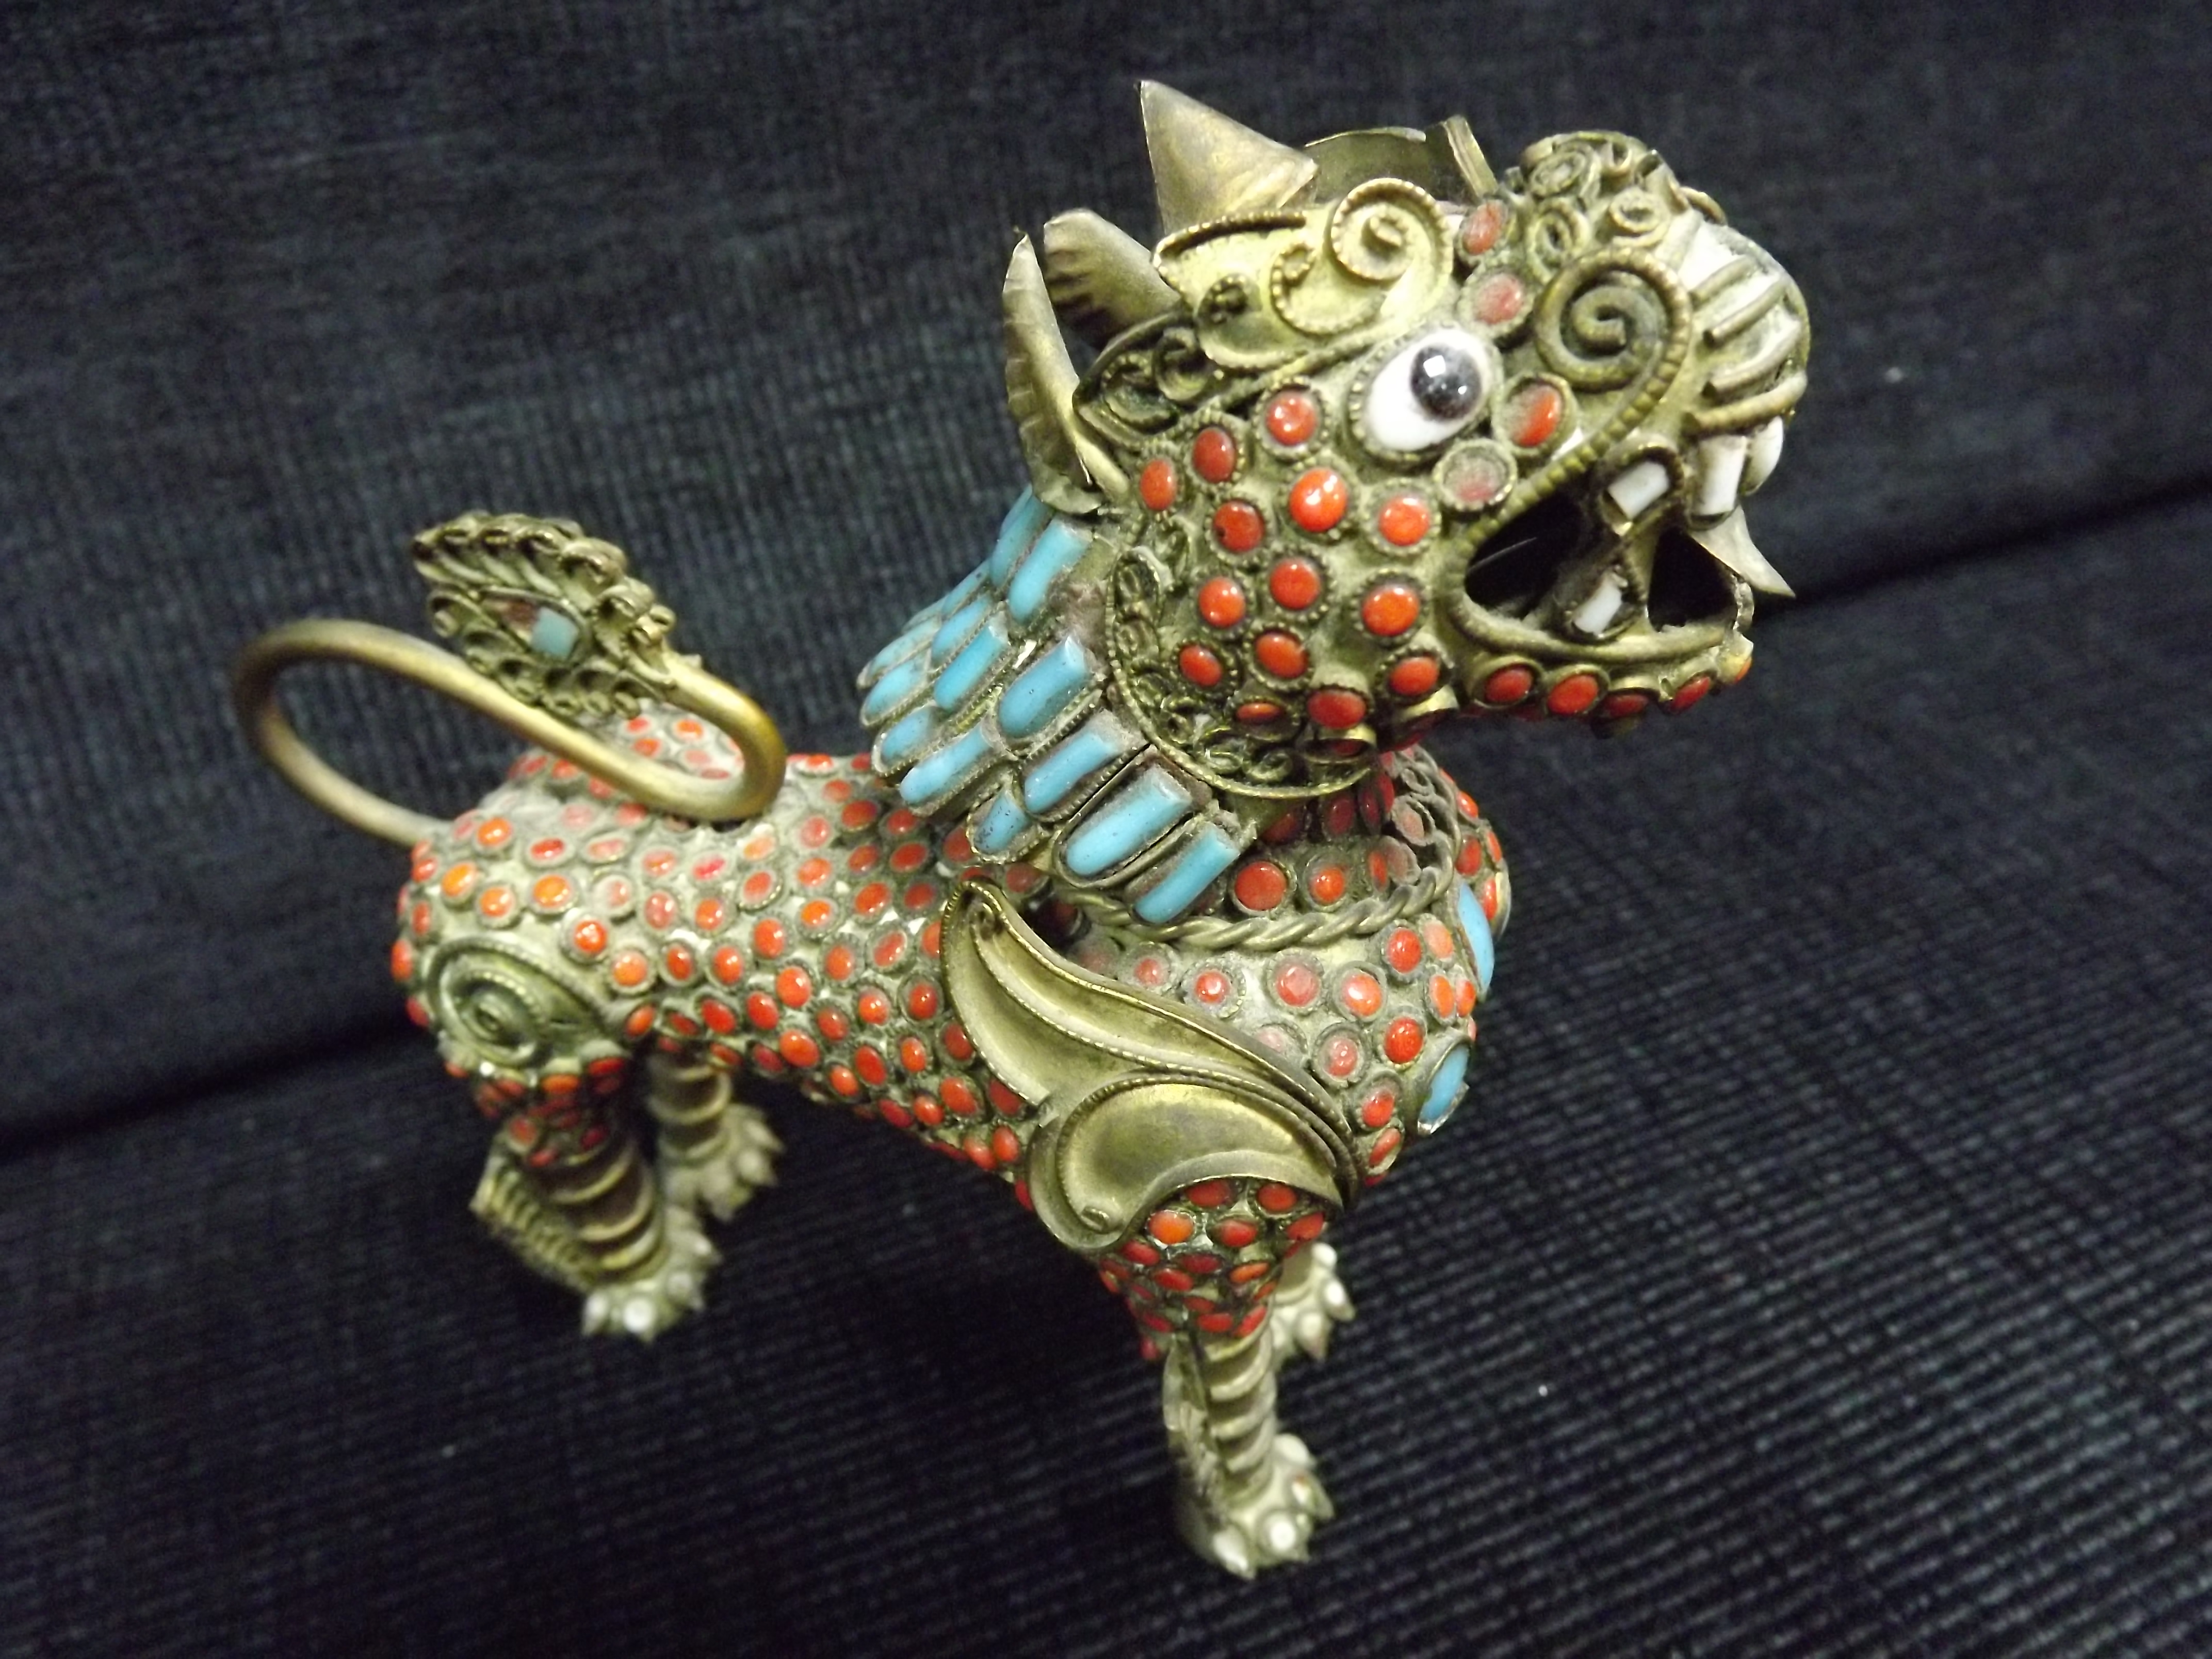 Chinese Gilt Metal and Cloisonne Enamel Qilin Figure. Fine detail, stone or glass eyes. White